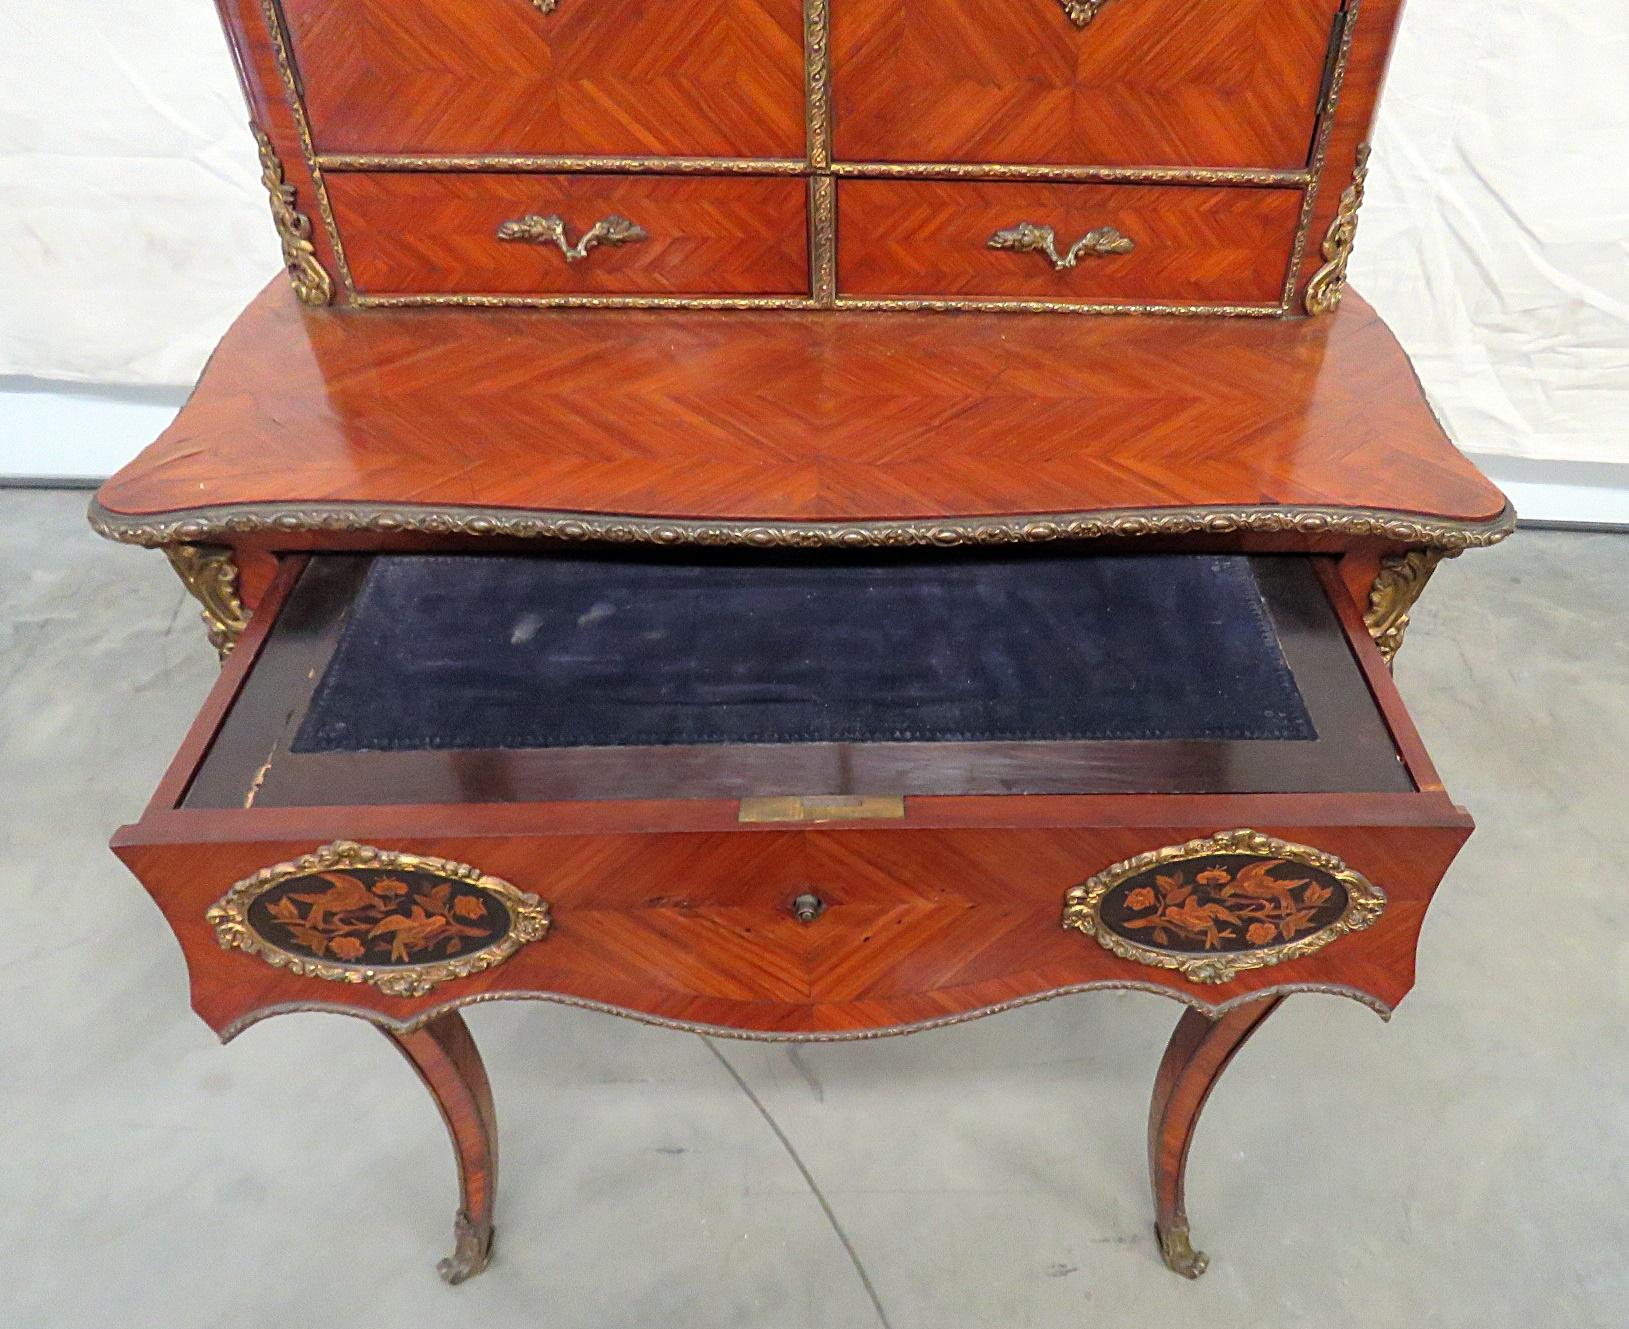 Antique C1870s French Louis XVI Style Inlaid King Wood Ladies Writing Desk For Sale 3